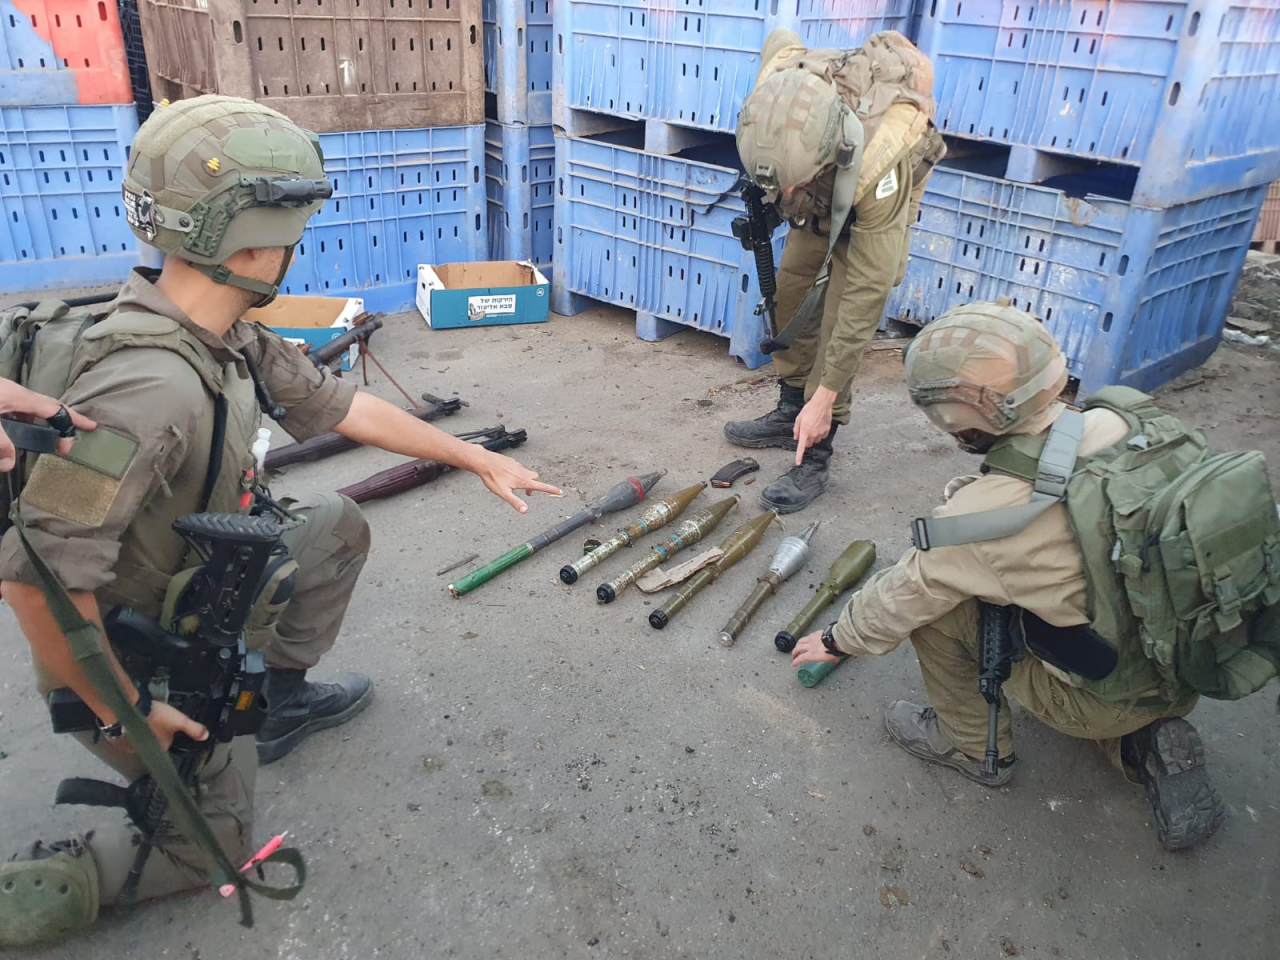 Israeli soldiers point to the weapons seized from Hamas. The item on the far left with red trimming is believed to be a North Korean-made F-7 rocket in the photo released by the Israel Defense Forces on Wednesday. (IDF)